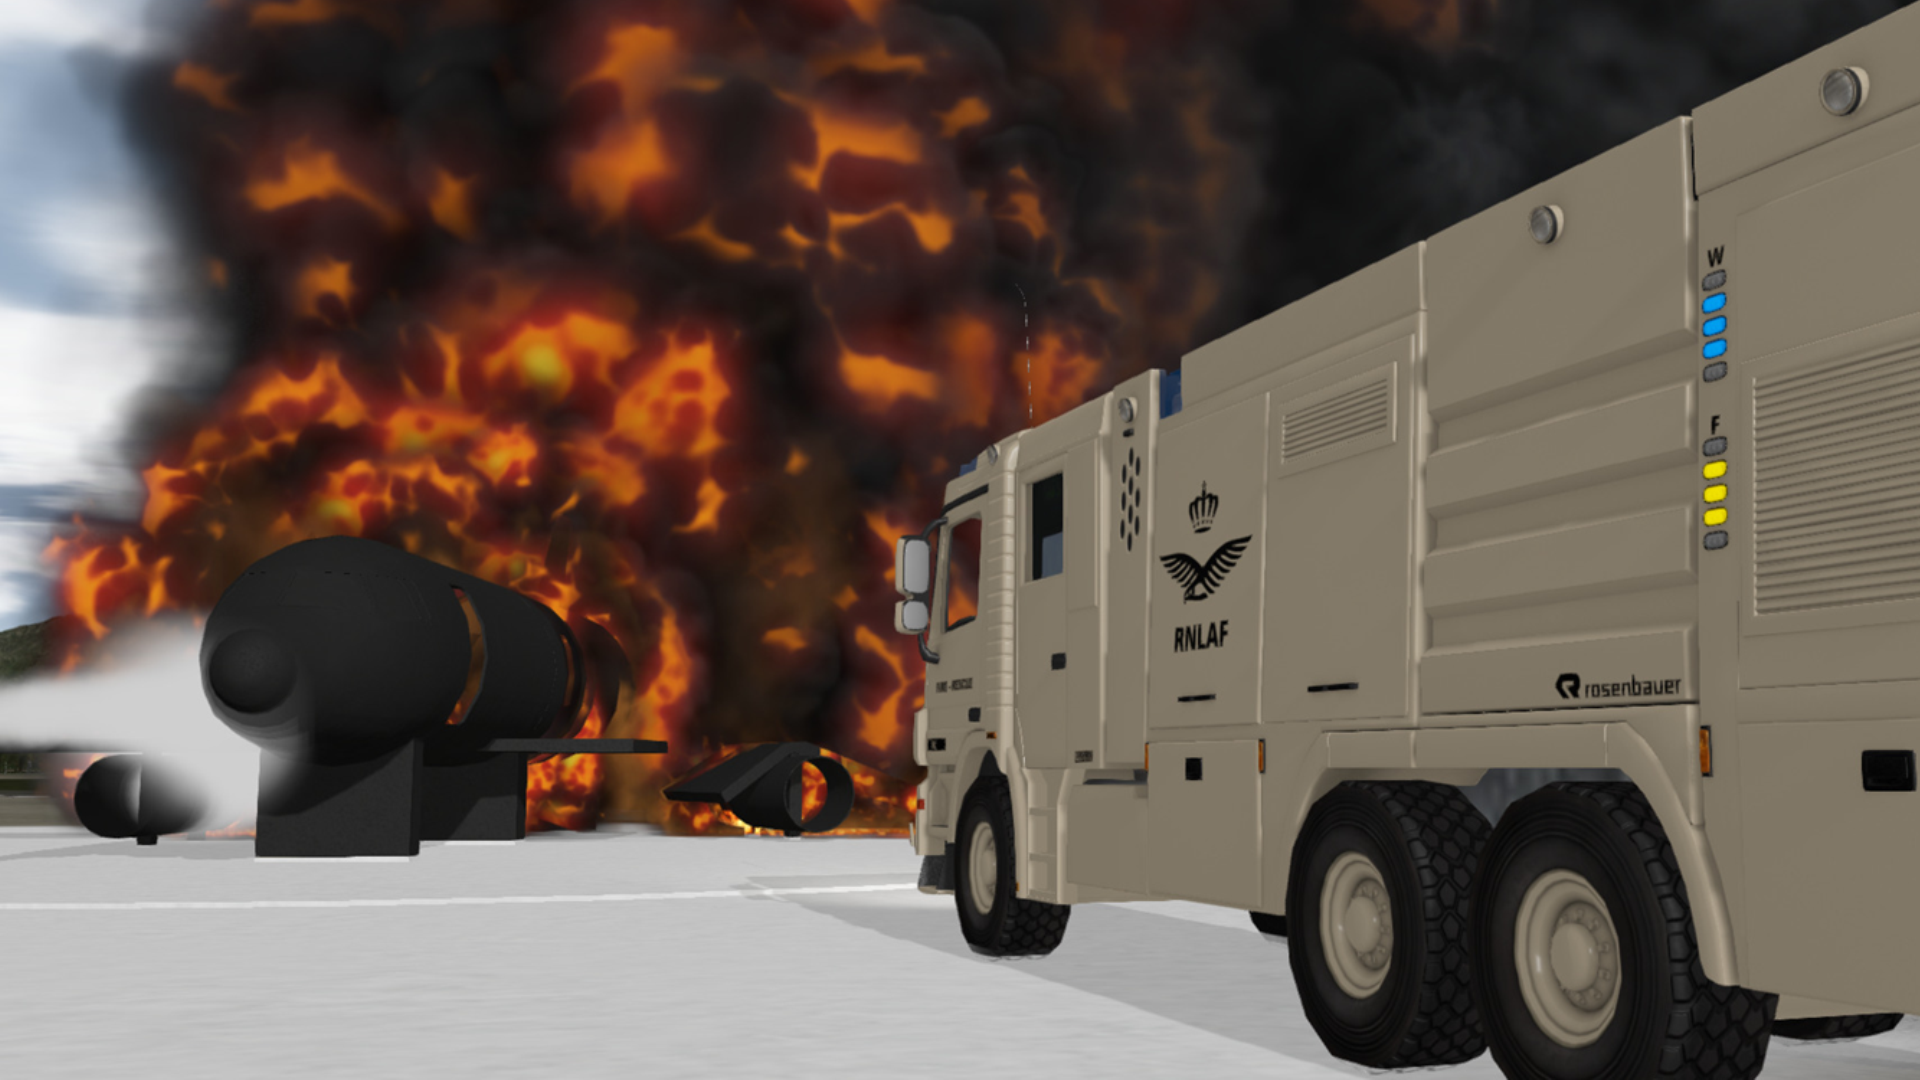 ARFF Training with Foam as an extinguishing agent in a safe and repeatable environment with the ADMS ARFF Simulator.